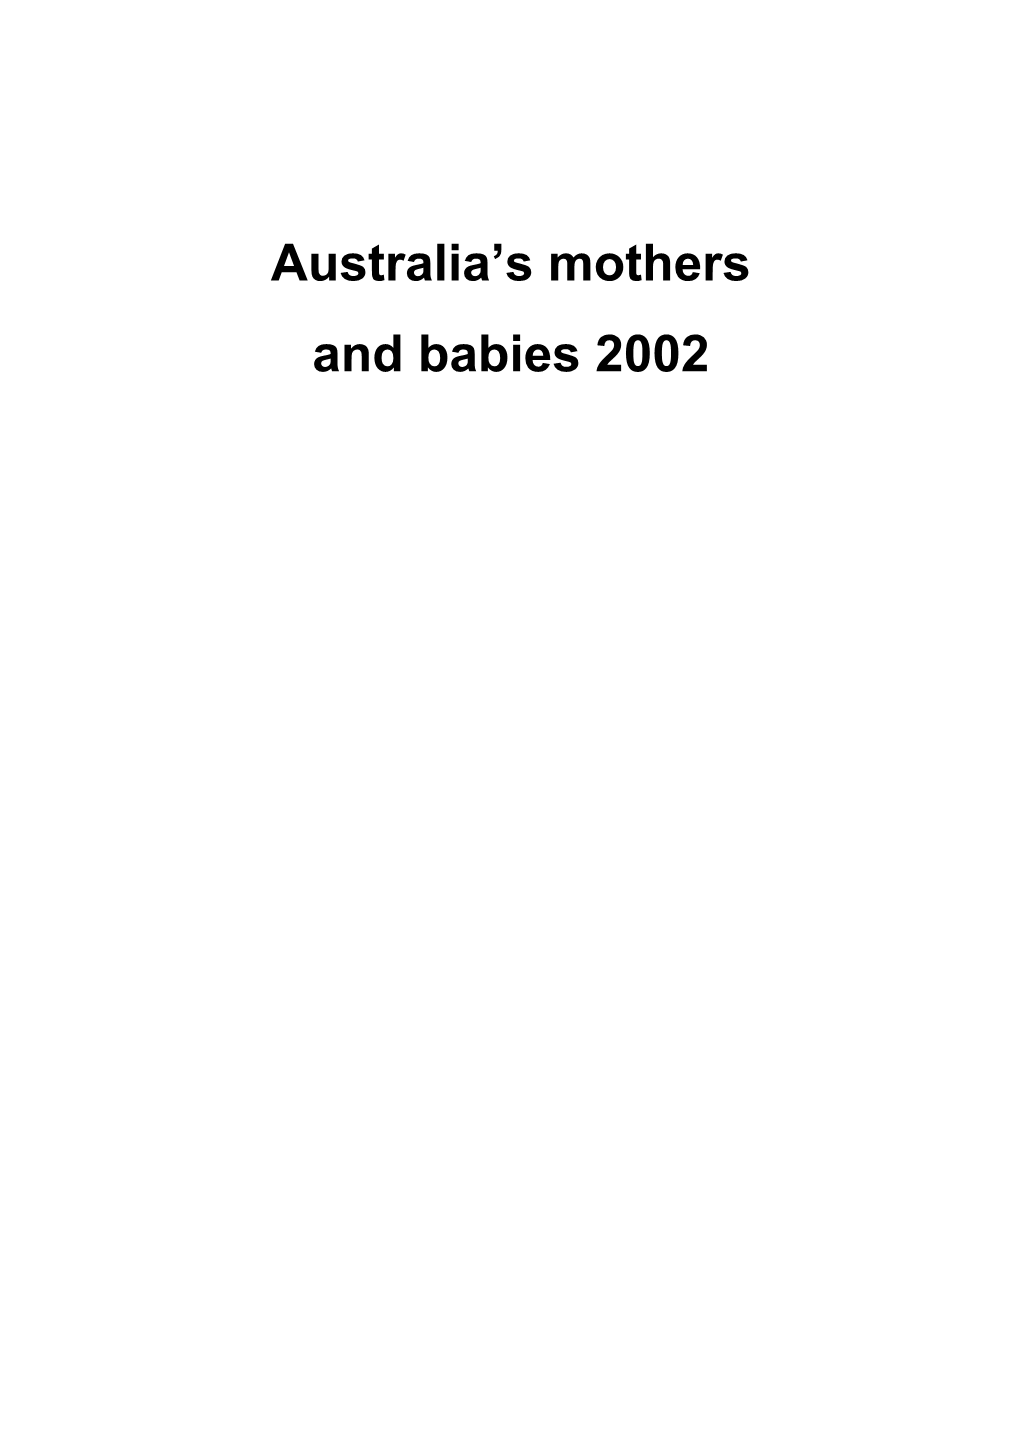 Australia's Mothers and Babies 2002